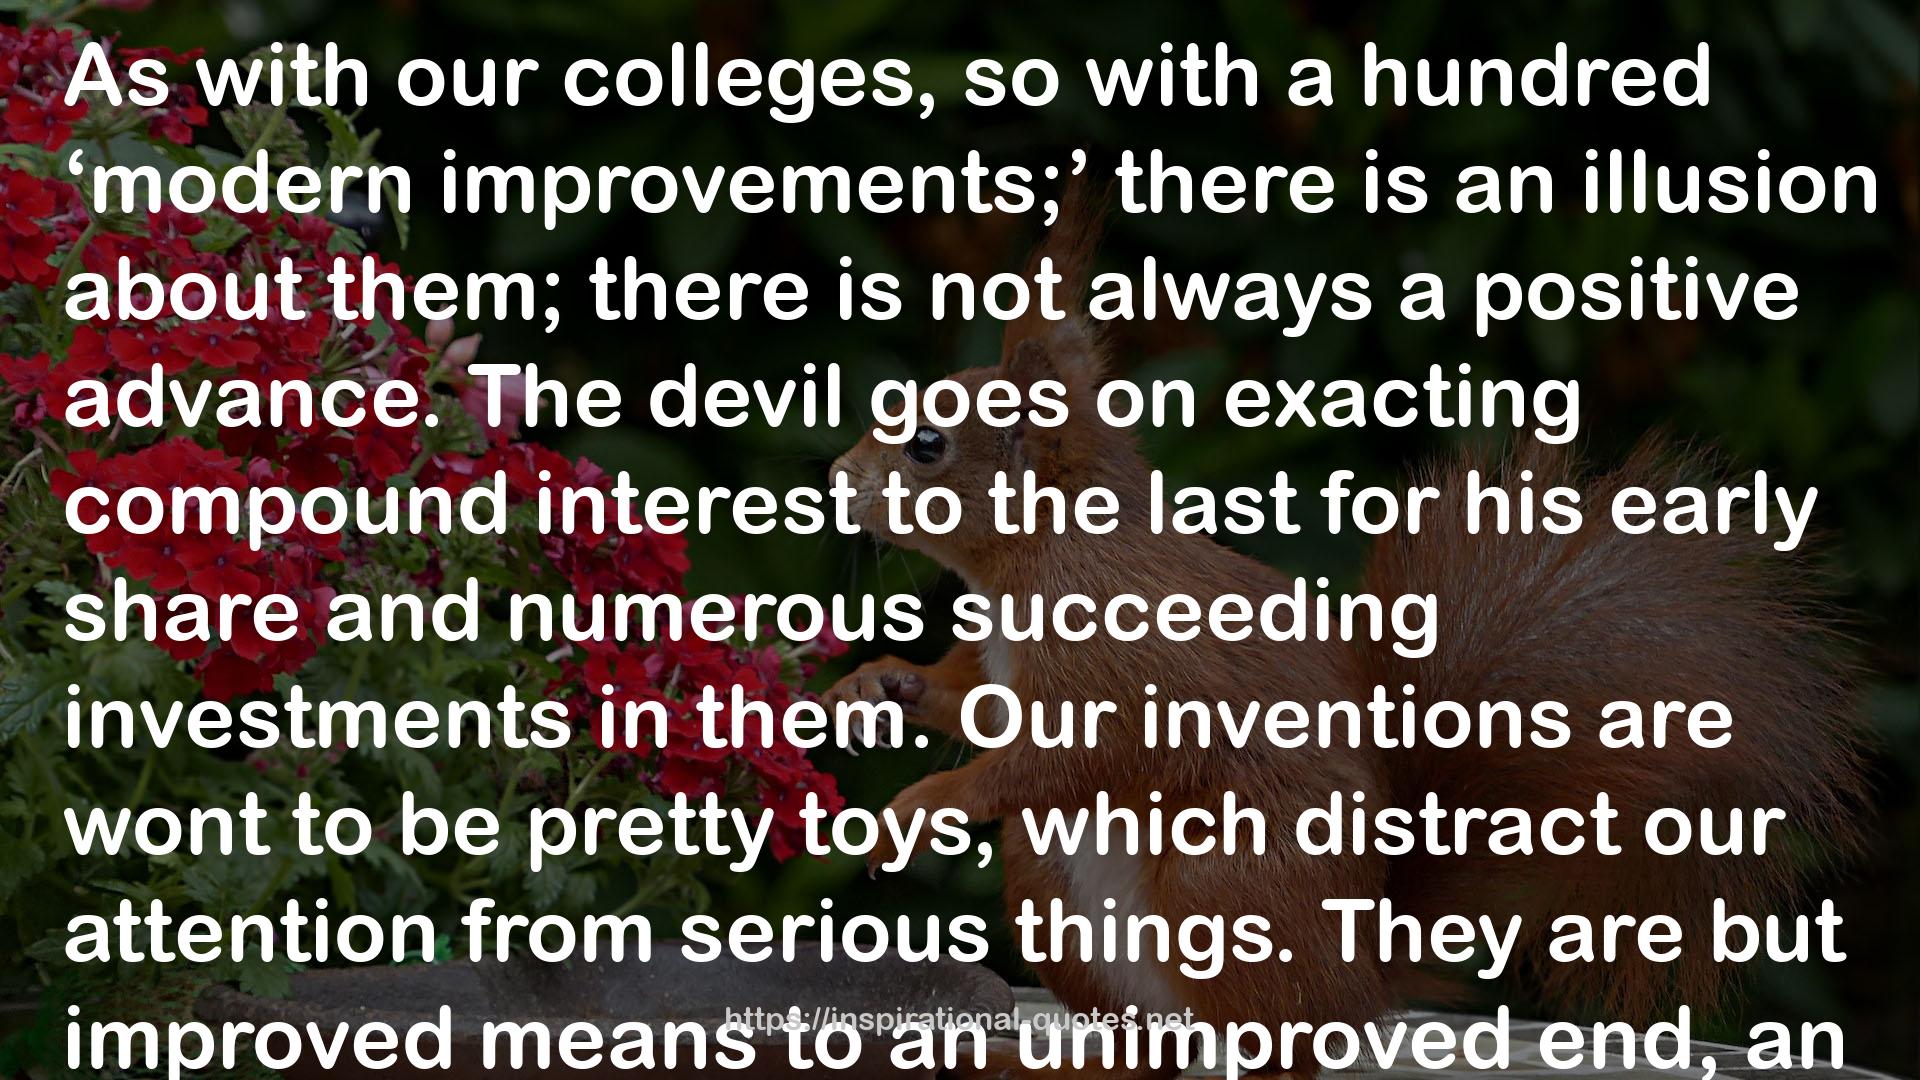 Our inventions  QUOTES